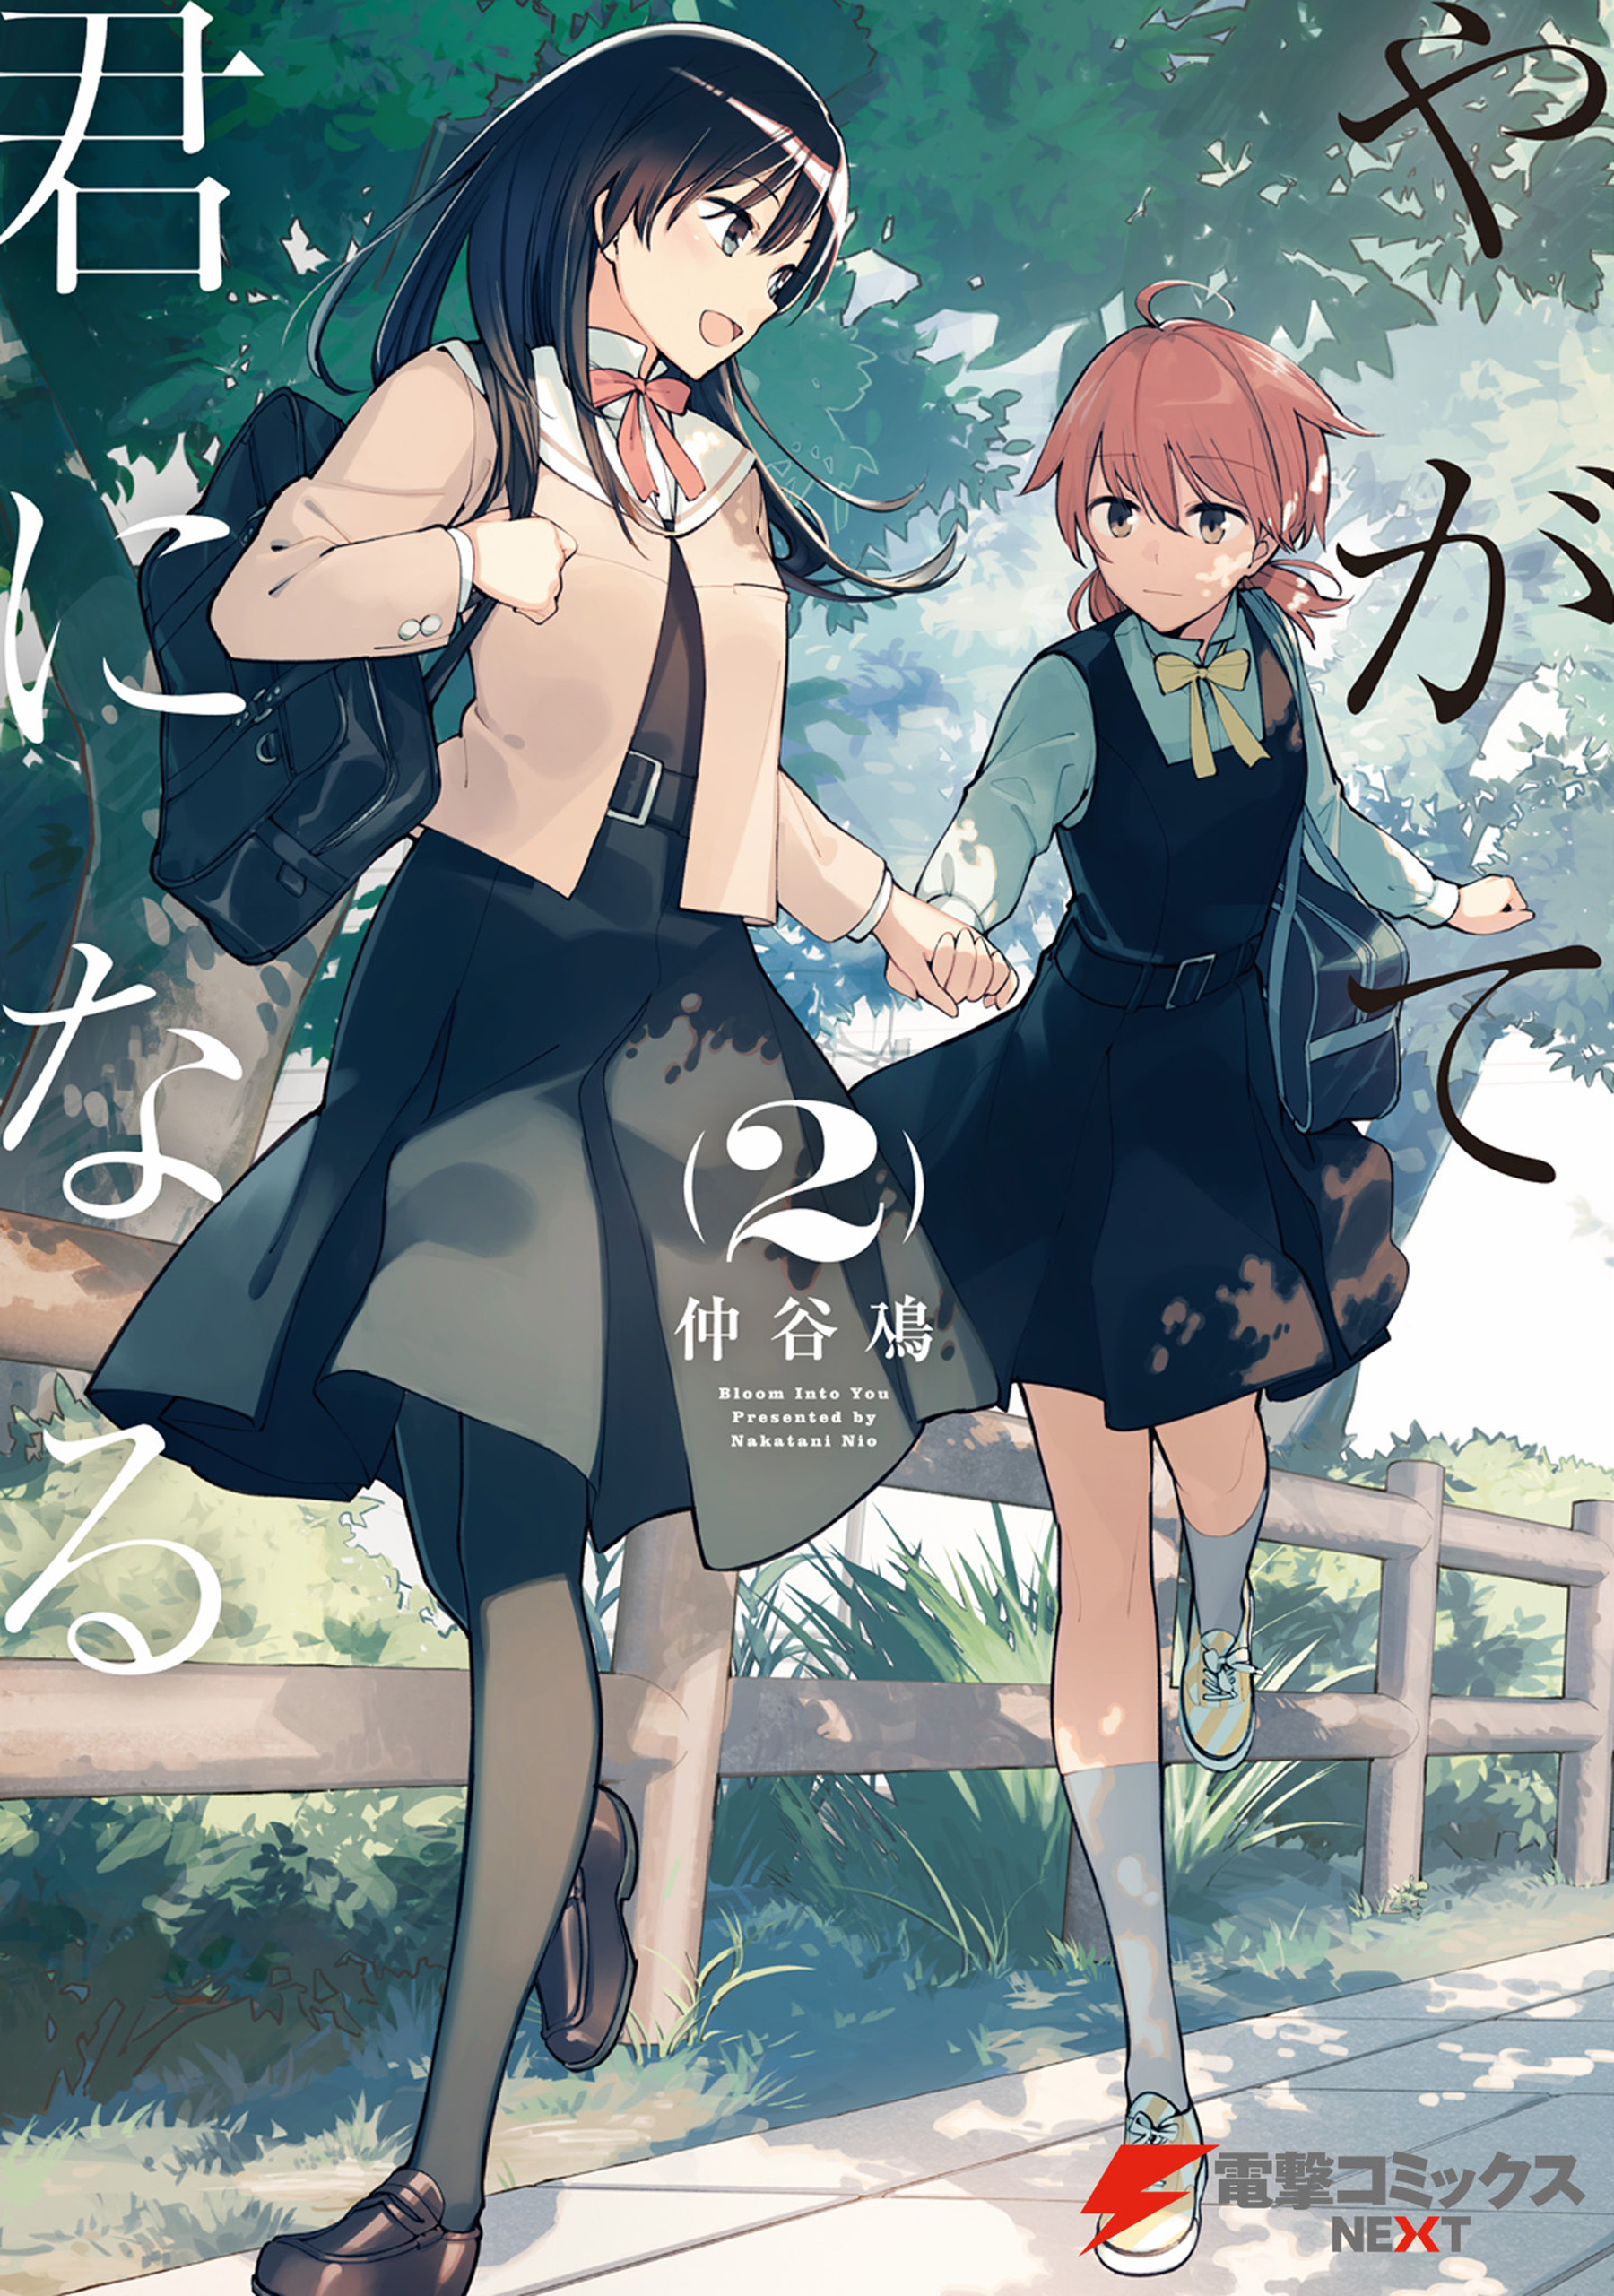 Bloom Into You Manga Ends in 3 Chapters - News - Anime News Network